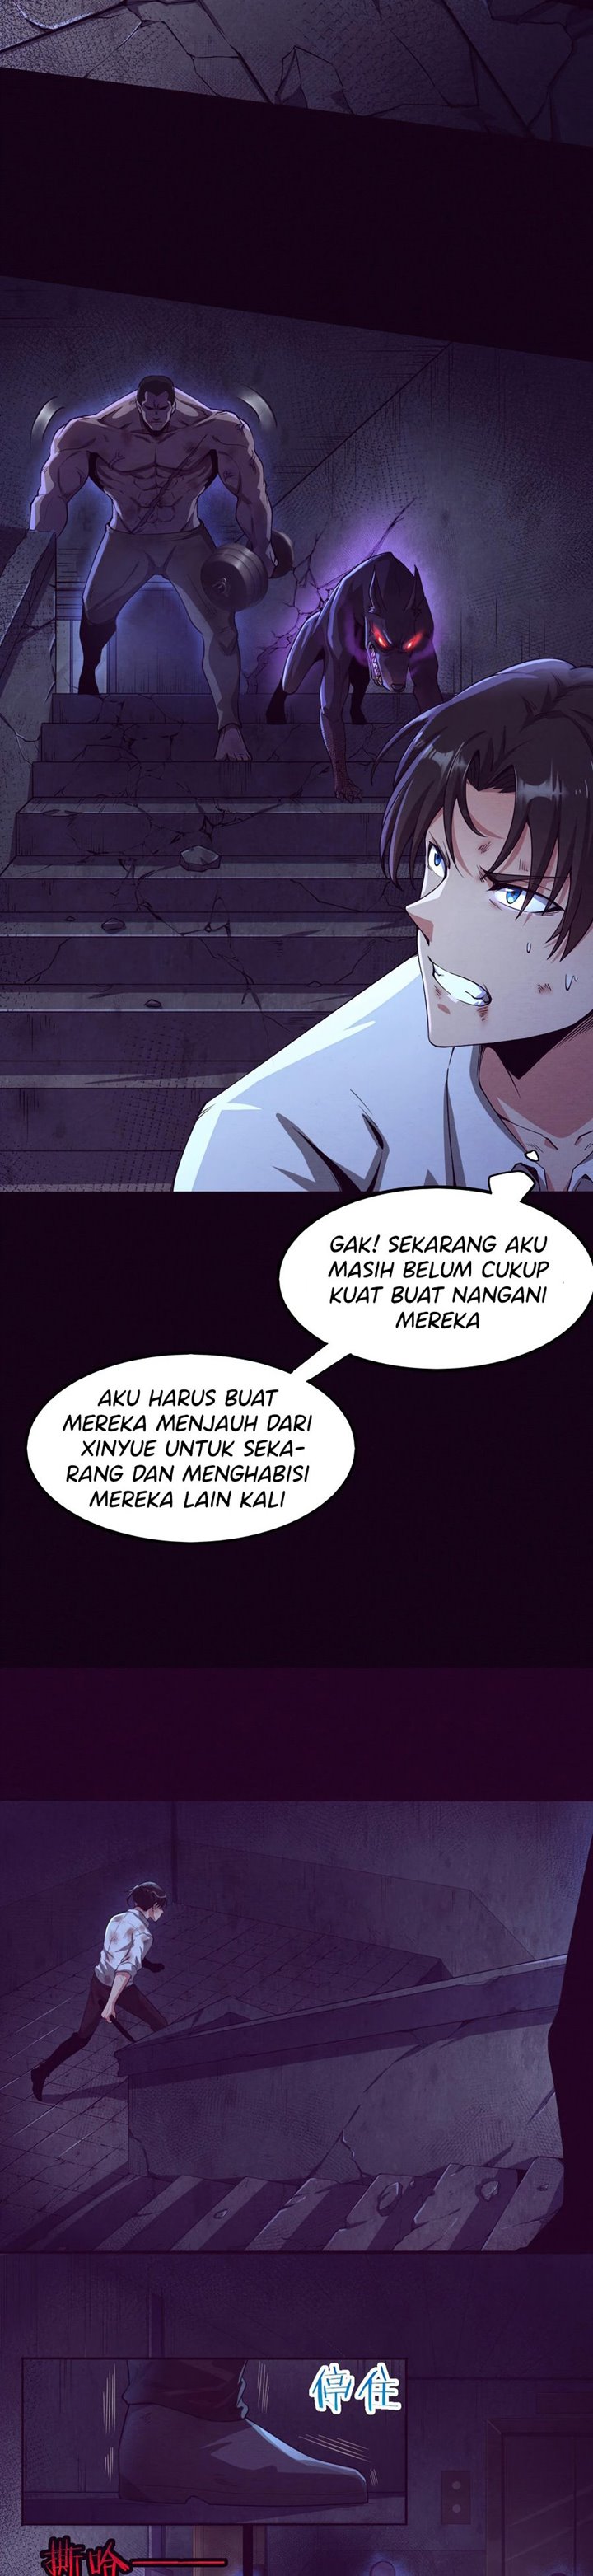 Evolution Frenzy Chapter 05 bahasa indoensia